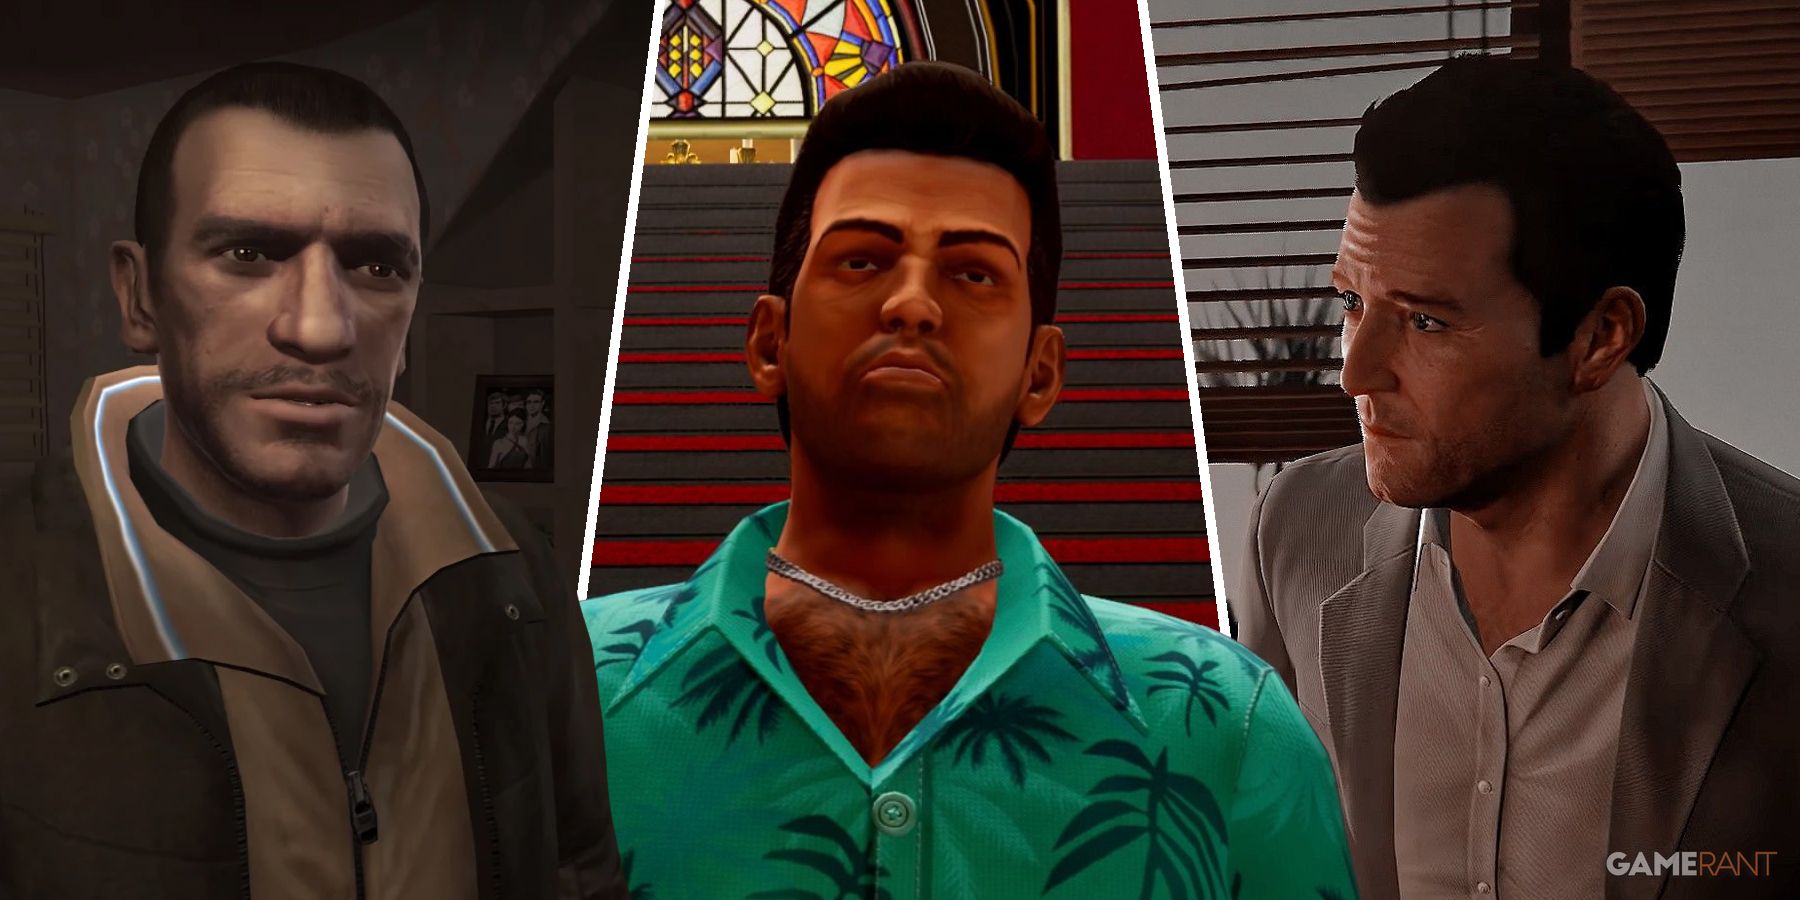 Niko, Tommy, and Michael from the GTA series